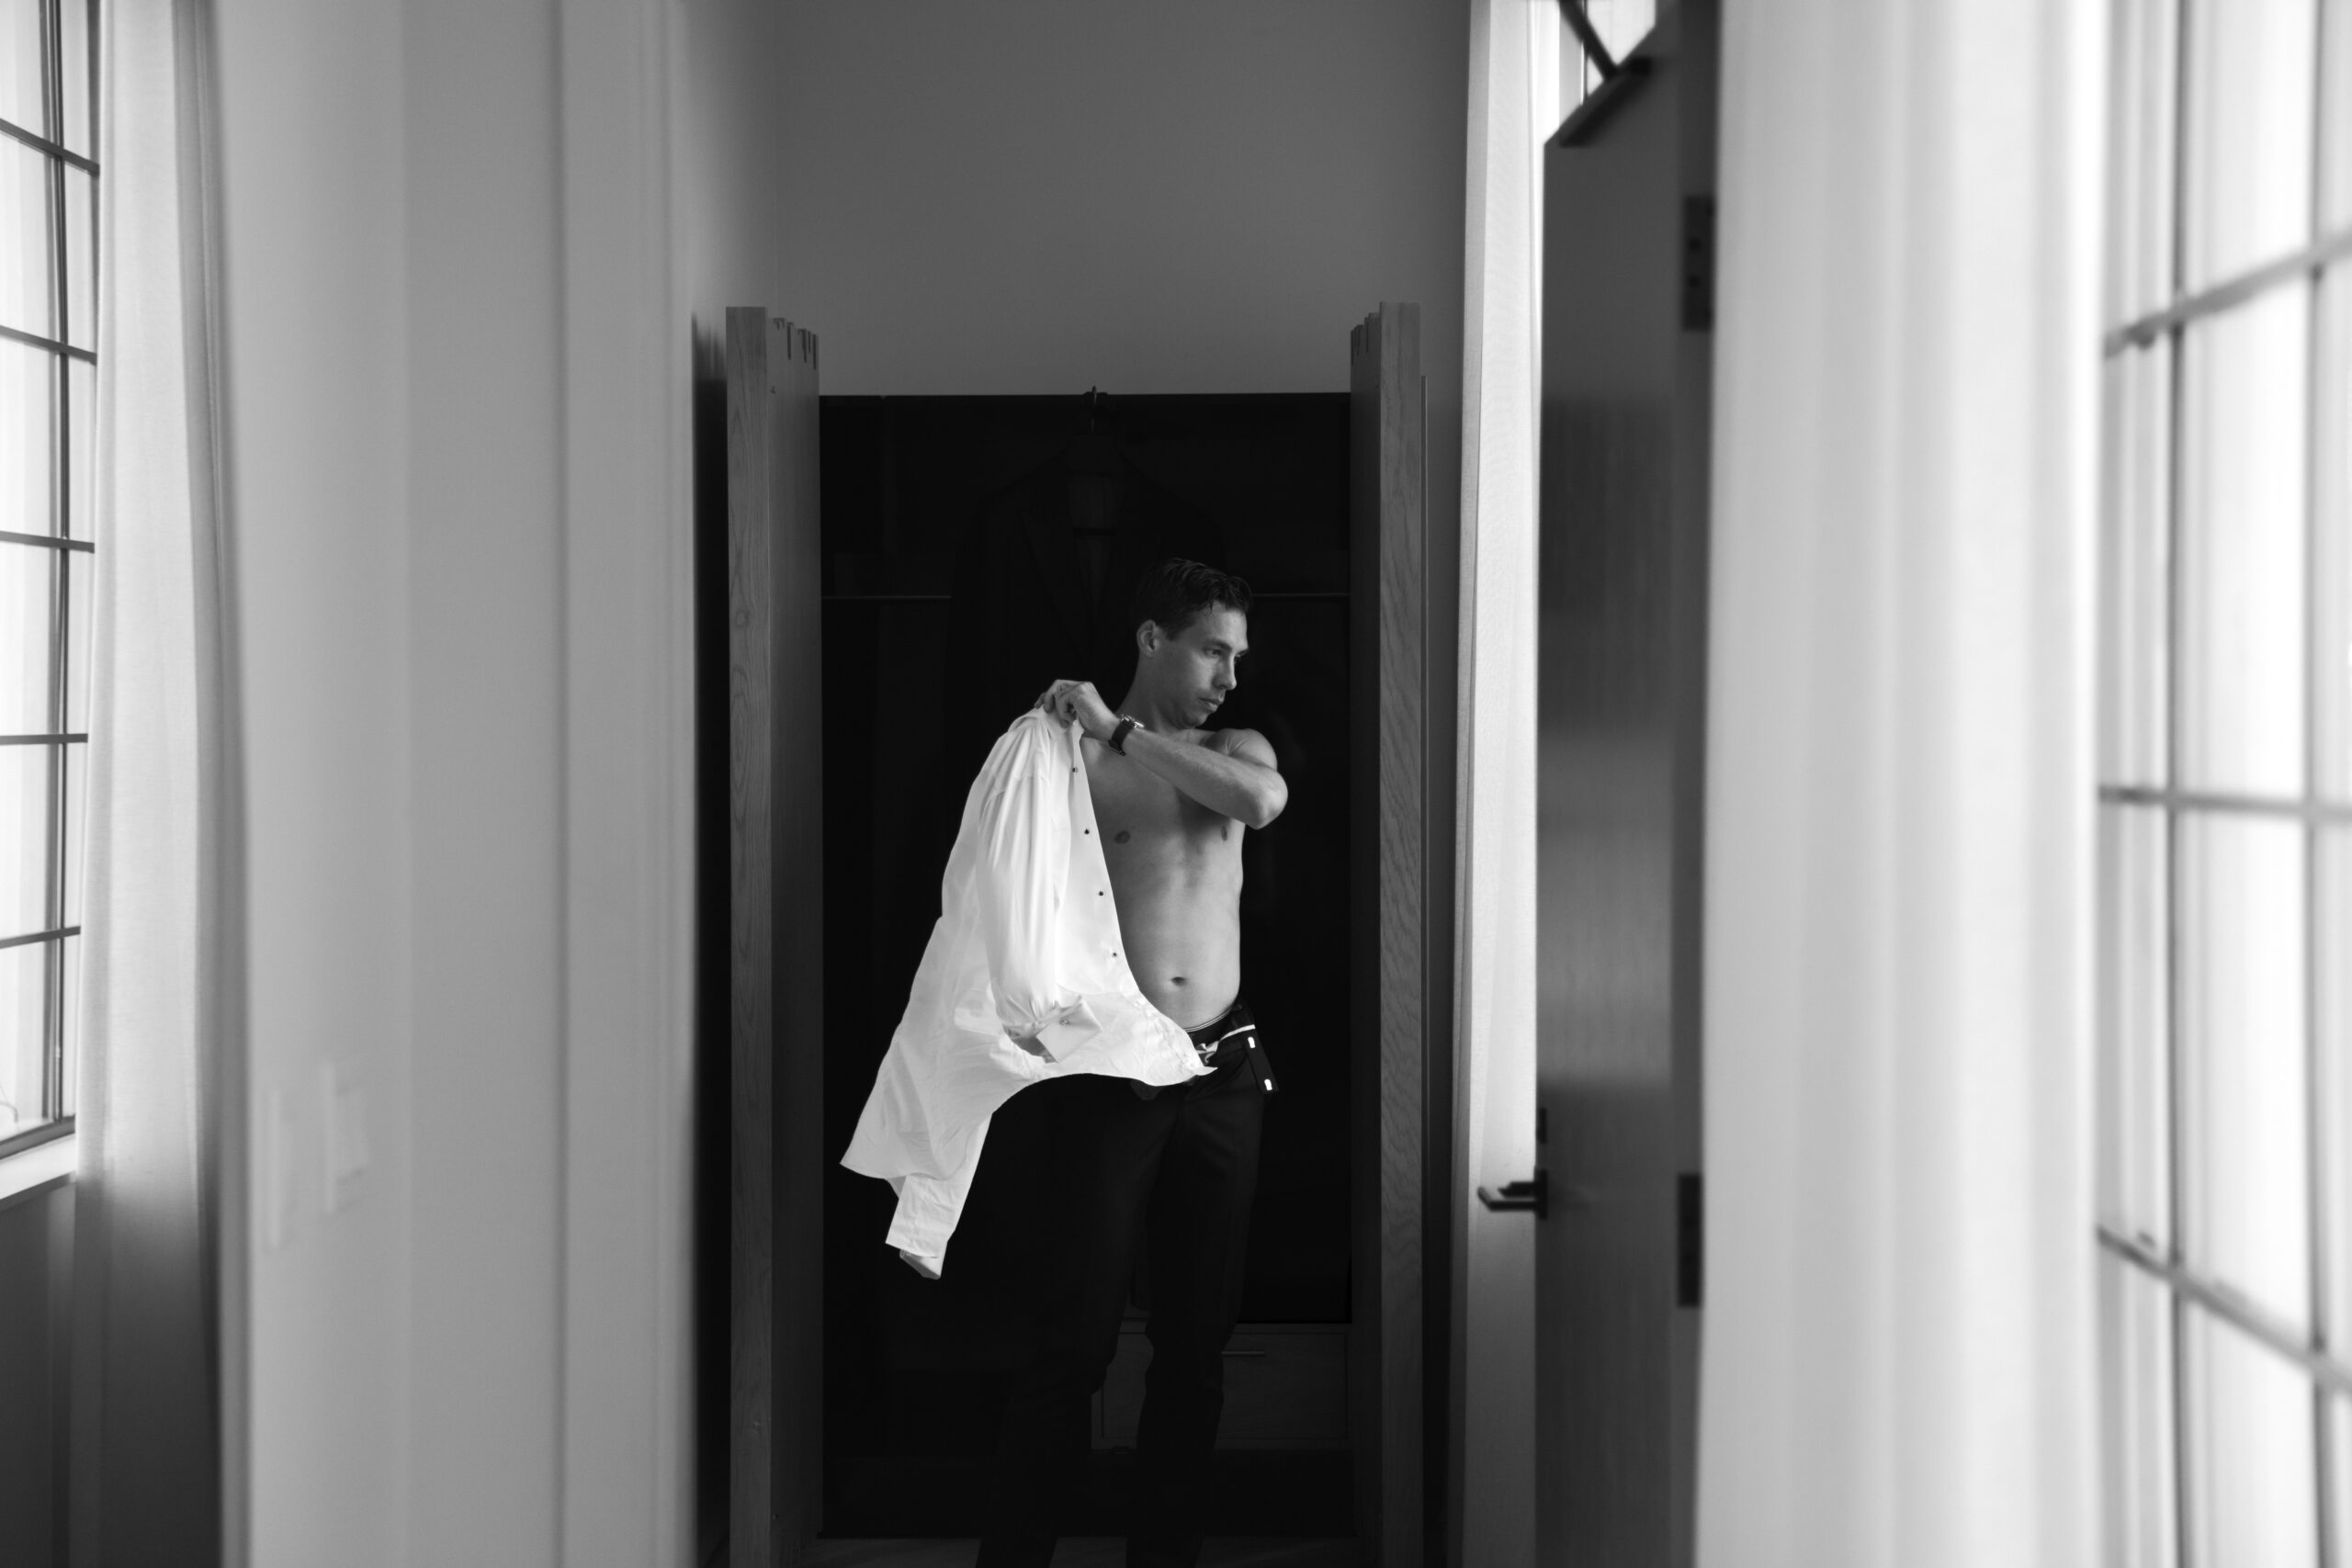 black and white photo of groom in front of window at end of long hallway putting on a white dress shirt